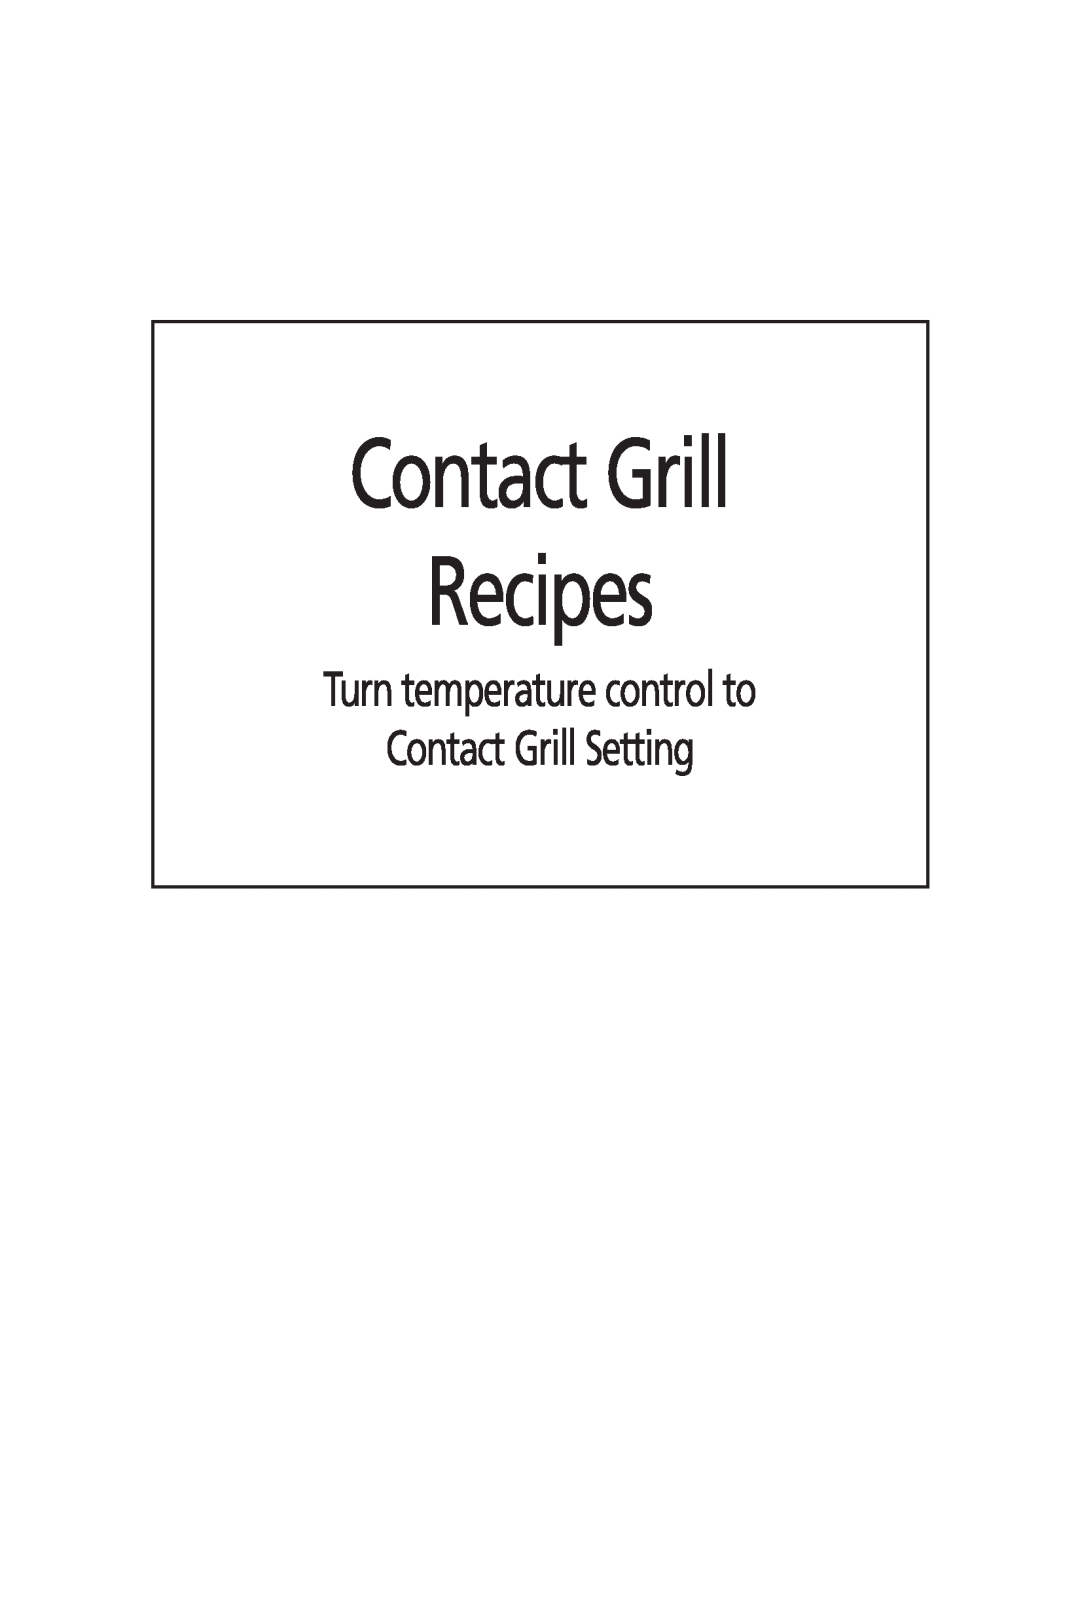 Sunbeam GC7800 manual Contact Grill Recipes, Turn temperature control to Contact Grill Setting 